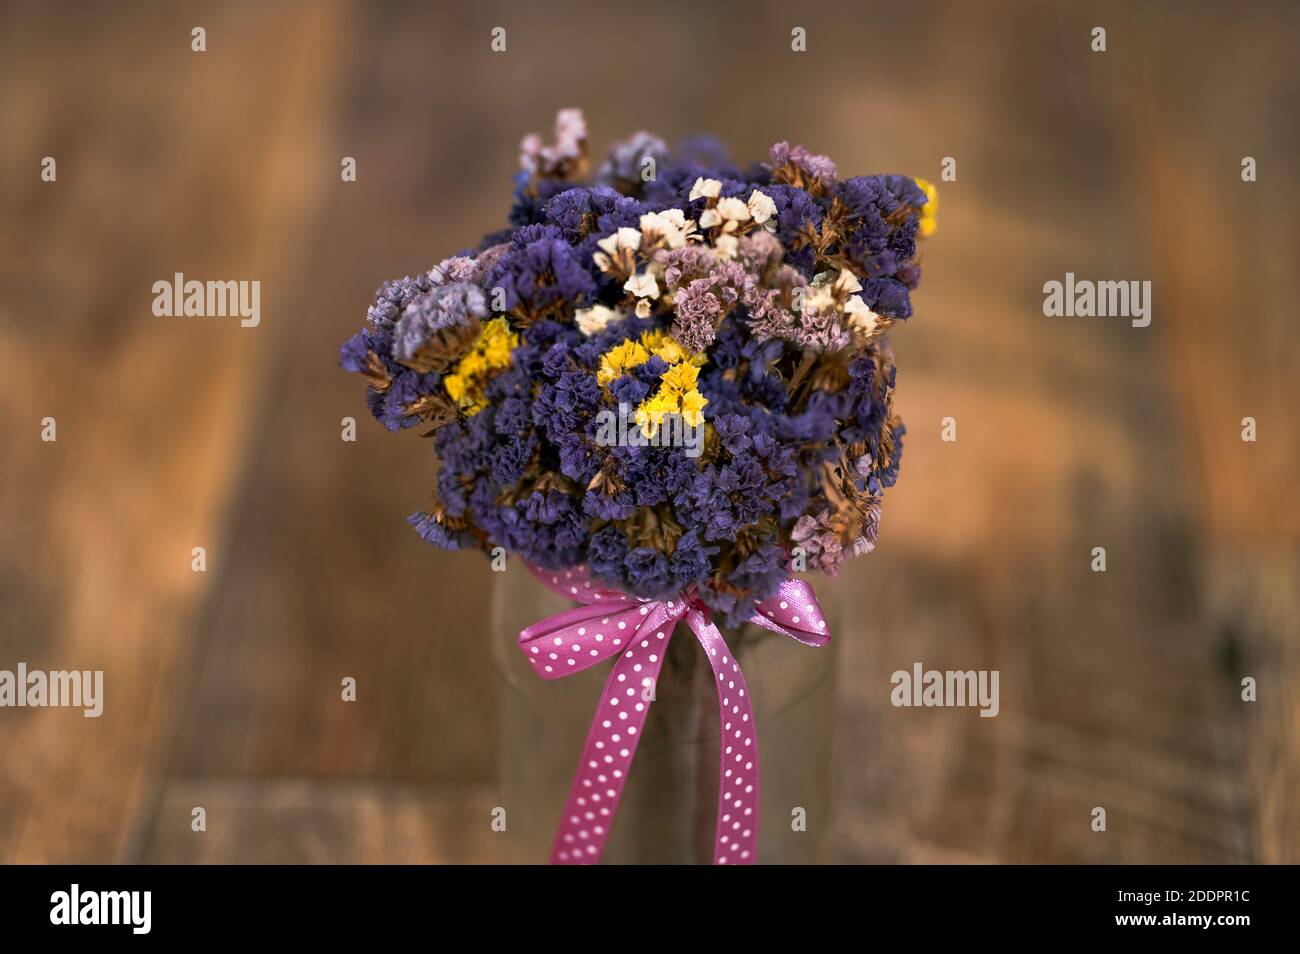 a bouquet of dried flowers, Limonium sinuatum, wavyleaf sea lavender, statice, notch leaf marsh rosemary, sea pink in a jar, pink ribbon, wooden floor Stock Photo